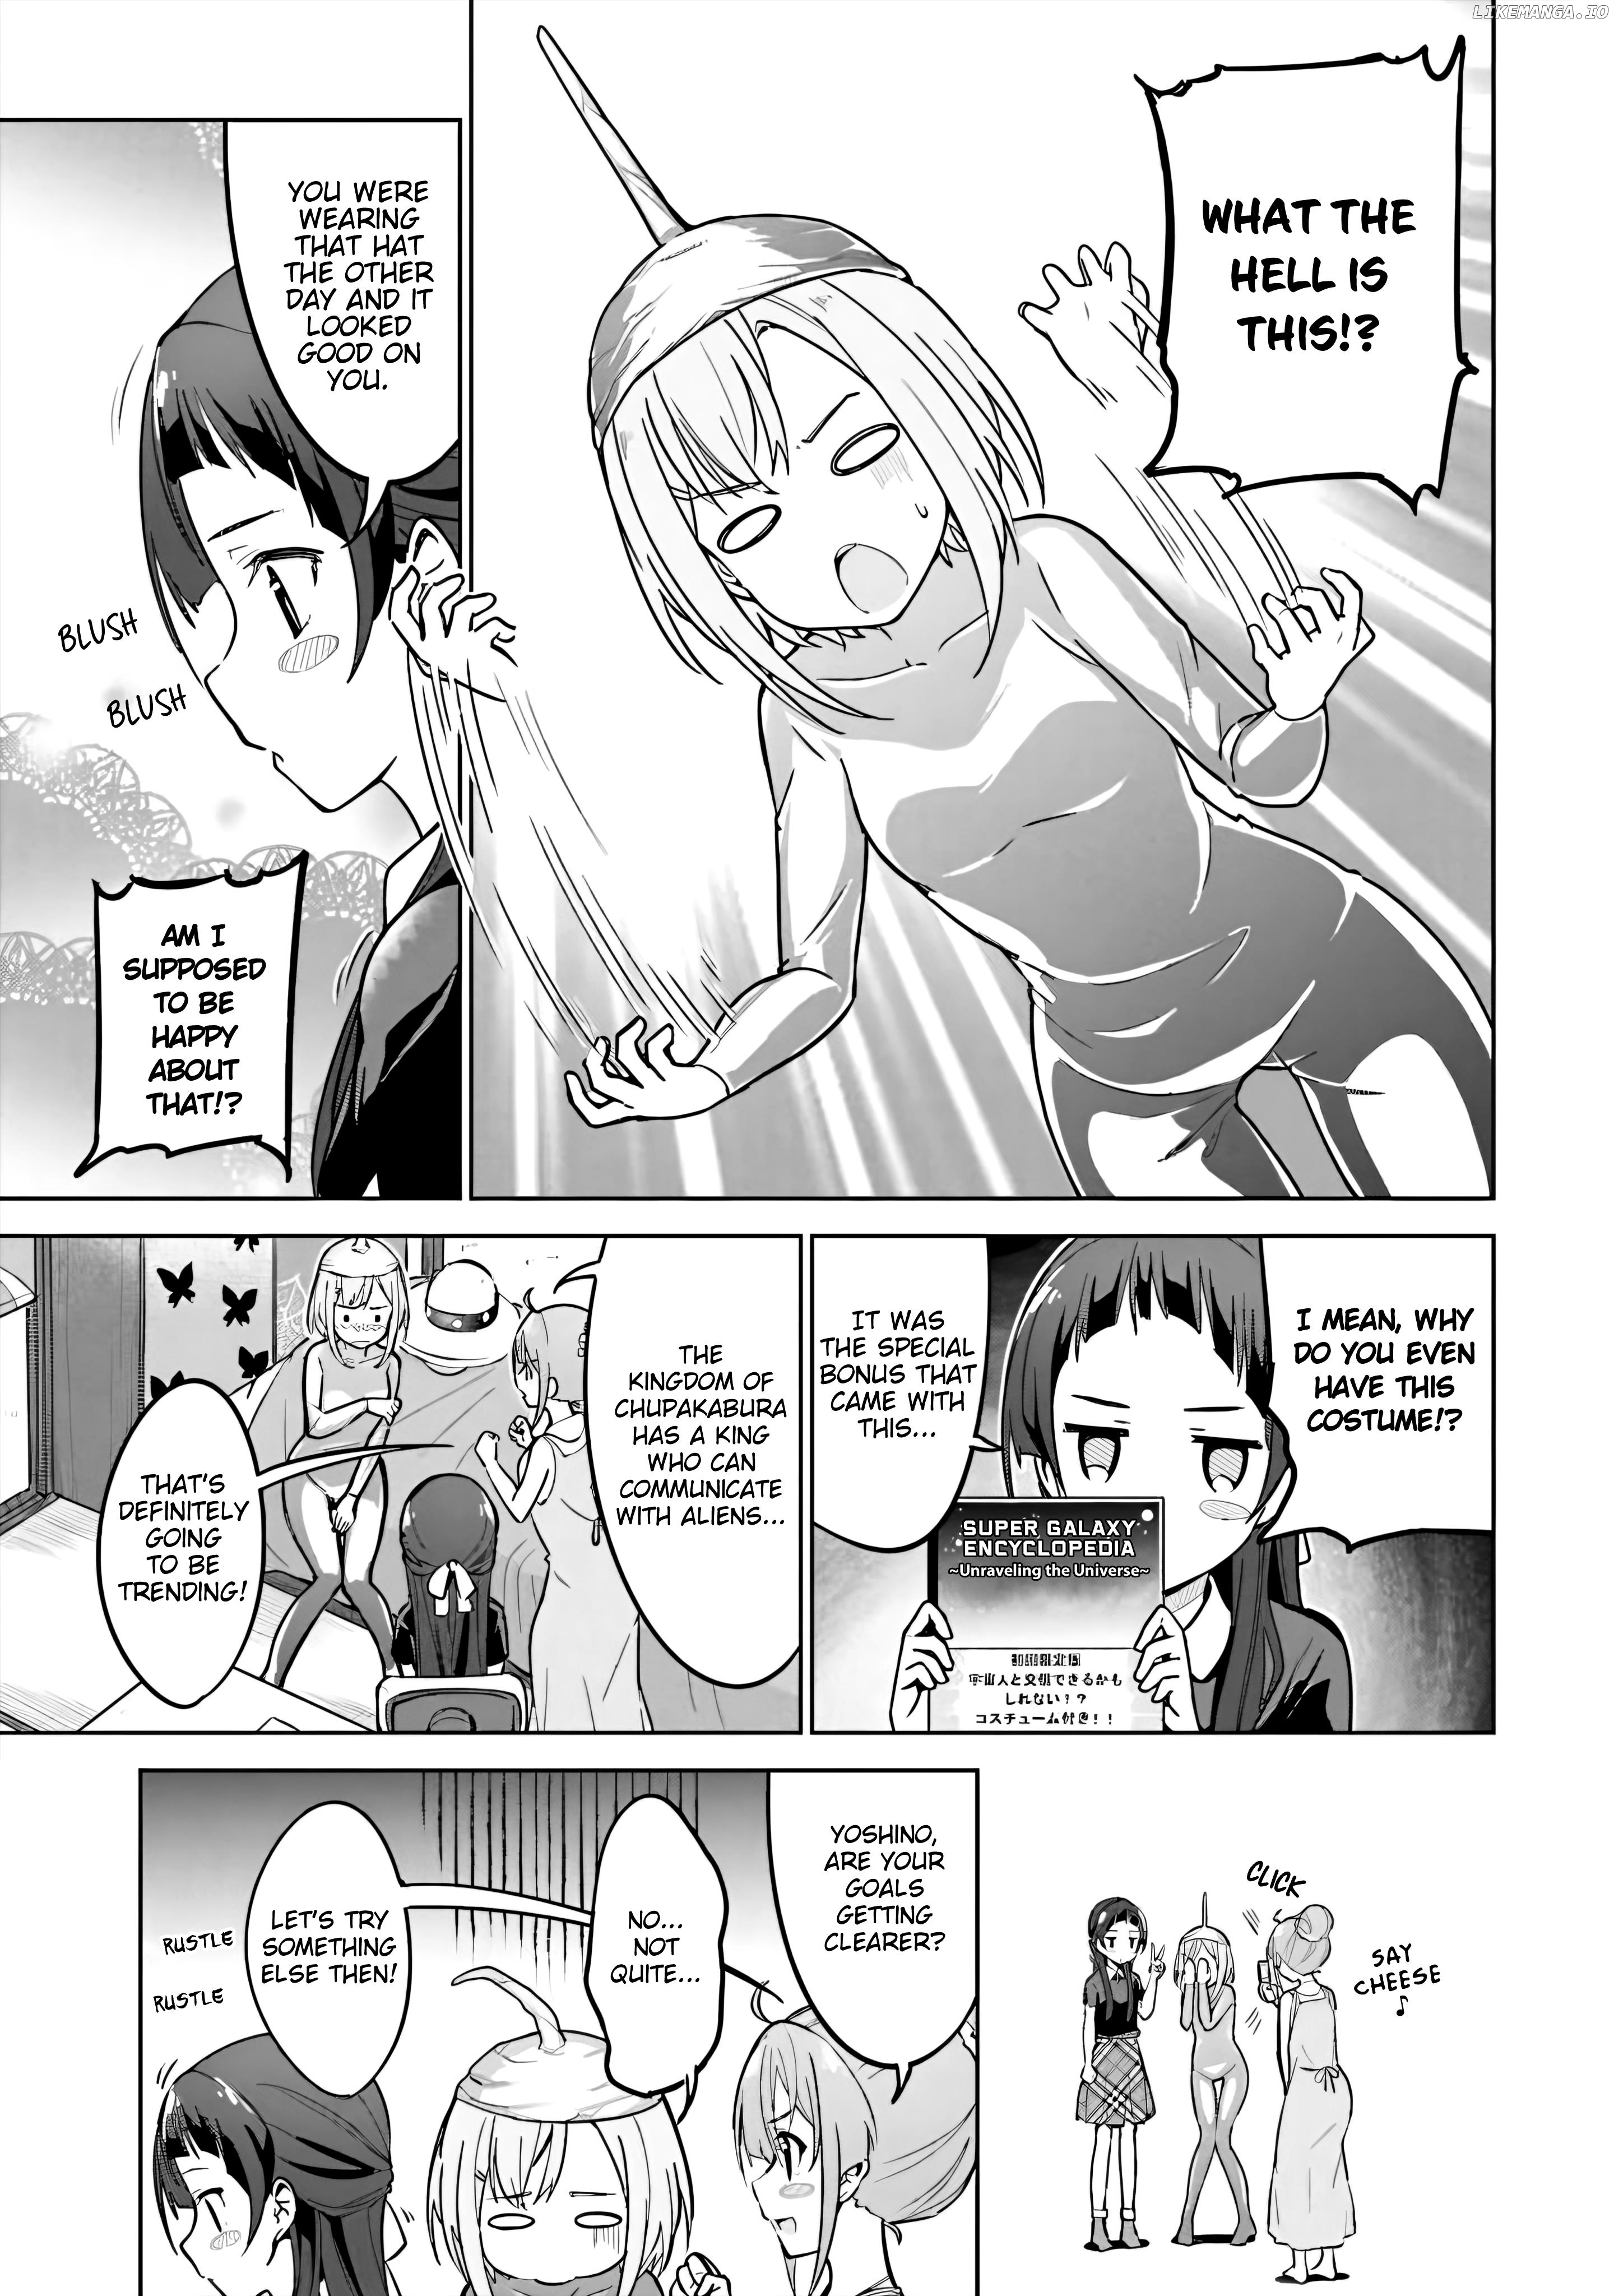 Sakura Quest Side Story: Ririko Oribe's Daily Report Vol 1 chapter 6 - page 9